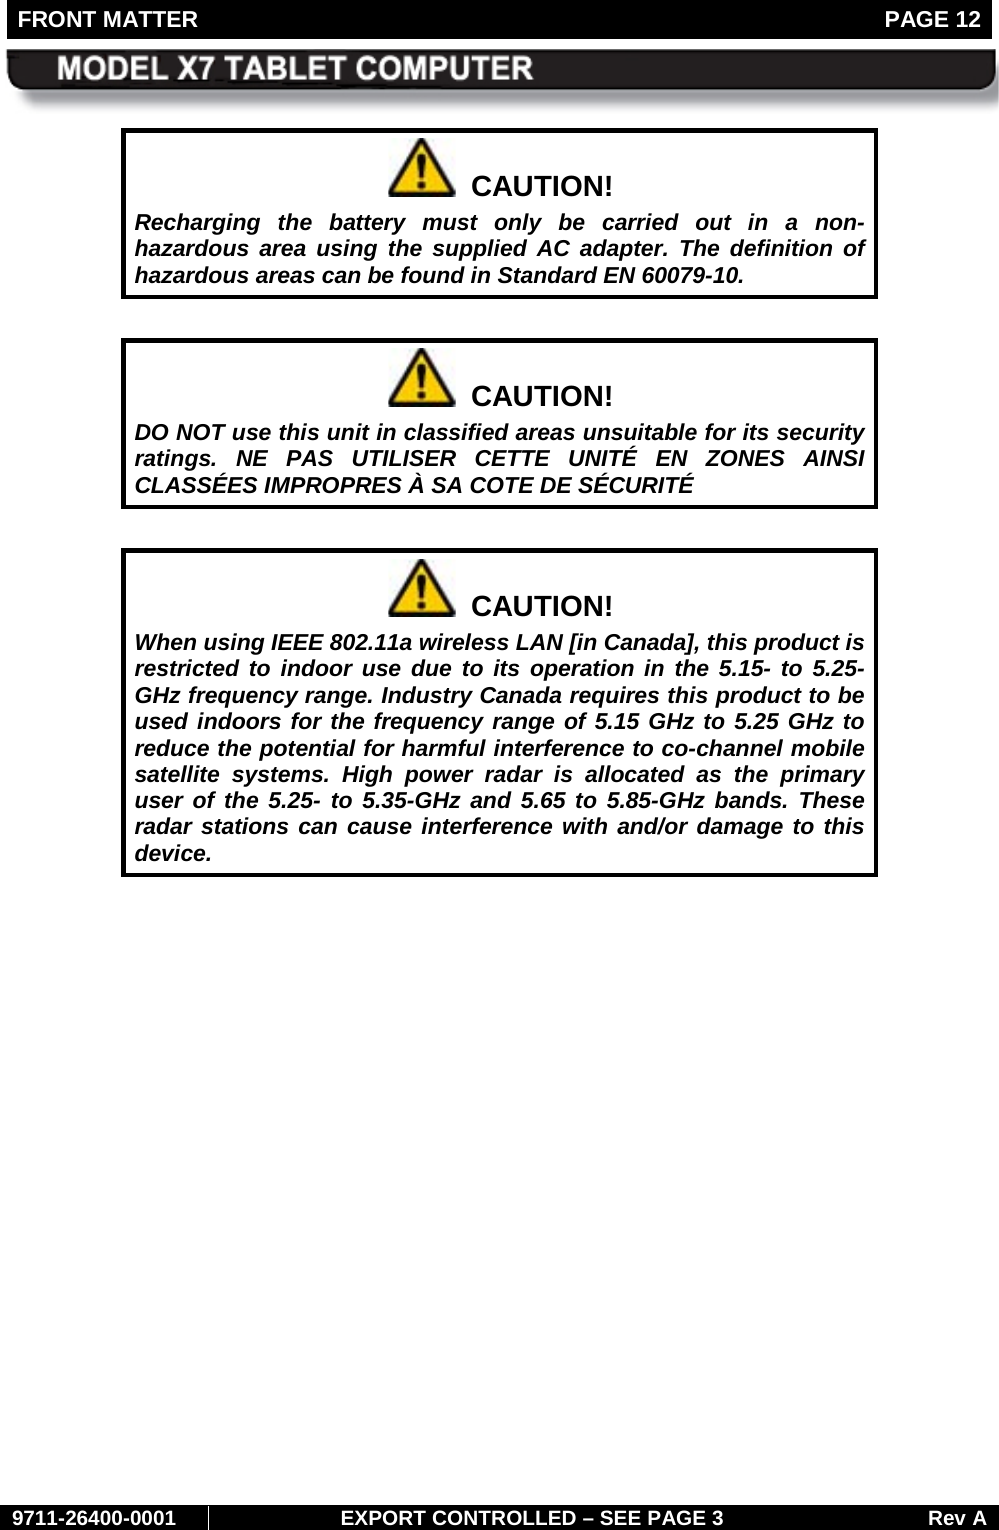 FRONT MATTER   PAGE 12        9711-26400-0001 EXPORT CONTROLLED – SEE PAGE 3 Rev A   CAUTION! Recharging the battery must only be carried out in a non-hazardous area using the supplied AC adapter. The definition of hazardous areas can be found in Standard EN 60079-10.    CAUTION! DO NOT use this unit in classified areas unsuitable for its security ratings. NE PAS UTILISER CETTE UNITÉ EN ZONES AINSI CLASSÉES IMPROPRES À SA COTE DE SÉCURITÉ    CAUTION! When using IEEE 802.11a wireless LAN [in Canada], this product is restricted to indoor use due to its operation in the 5.15- to 5.25-GHz frequency range. Industry Canada requires this product to be used indoors for the frequency range of 5.15 GHz to 5.25 GHz to reduce the potential for harmful interference to co-channel mobile satellite systems. High power radar is allocated as the primary user of the 5.25- to 5.35-GHz and 5.65 to 5.85-GHz bands. These radar stations can cause interference with and/or damage to this device.     